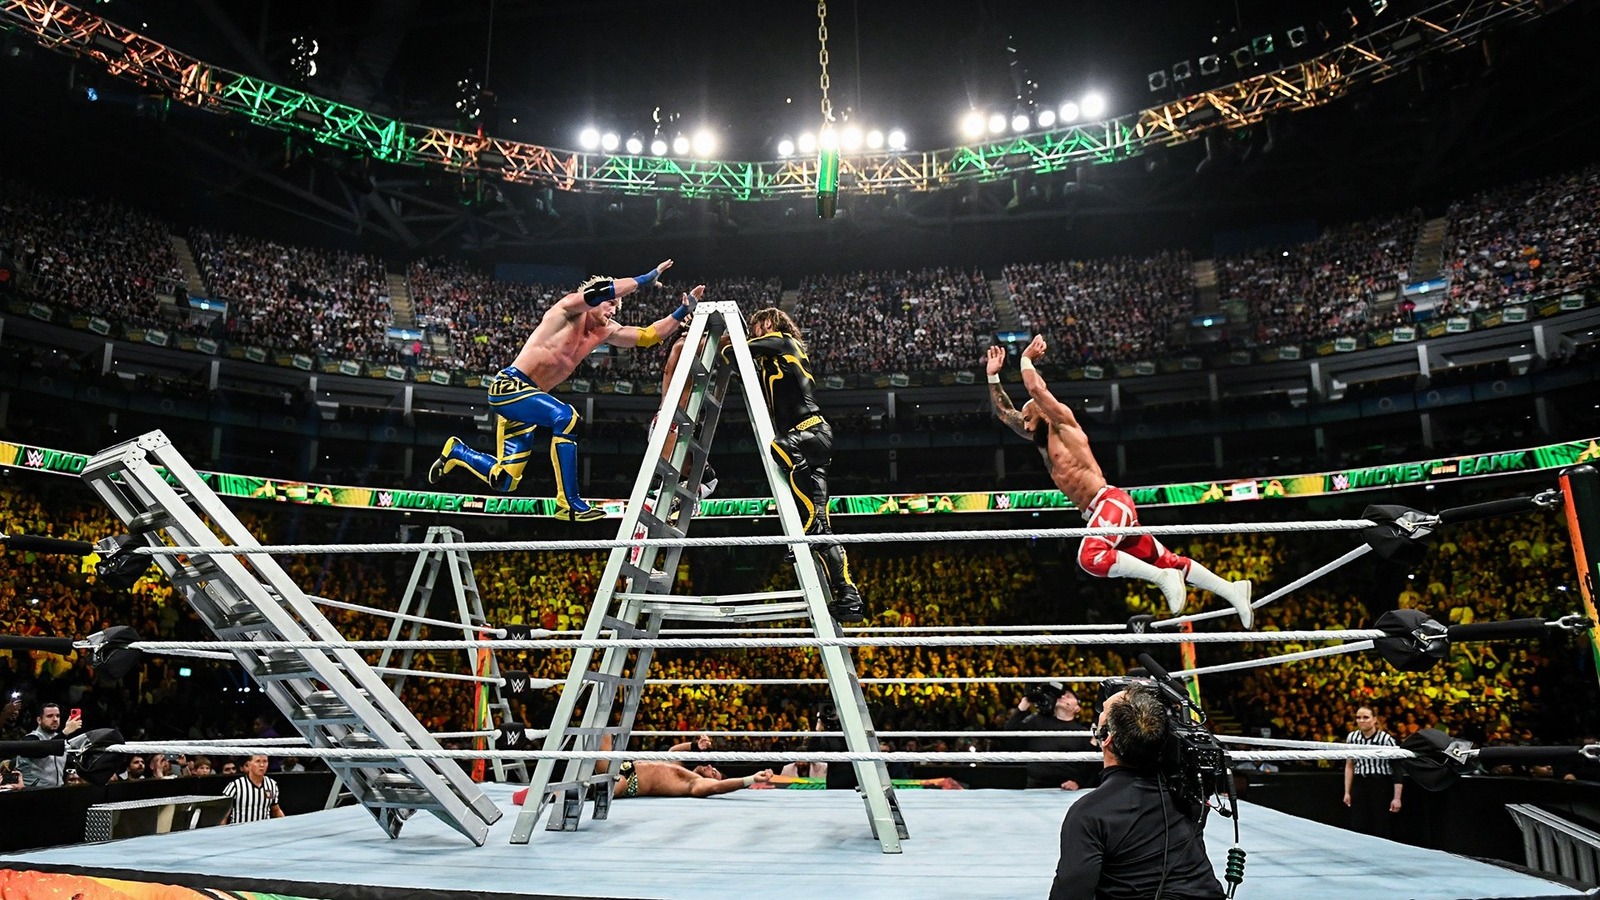 Mike Chioda On WWE's Goal With Stadium Shows For Big Premium Live Events